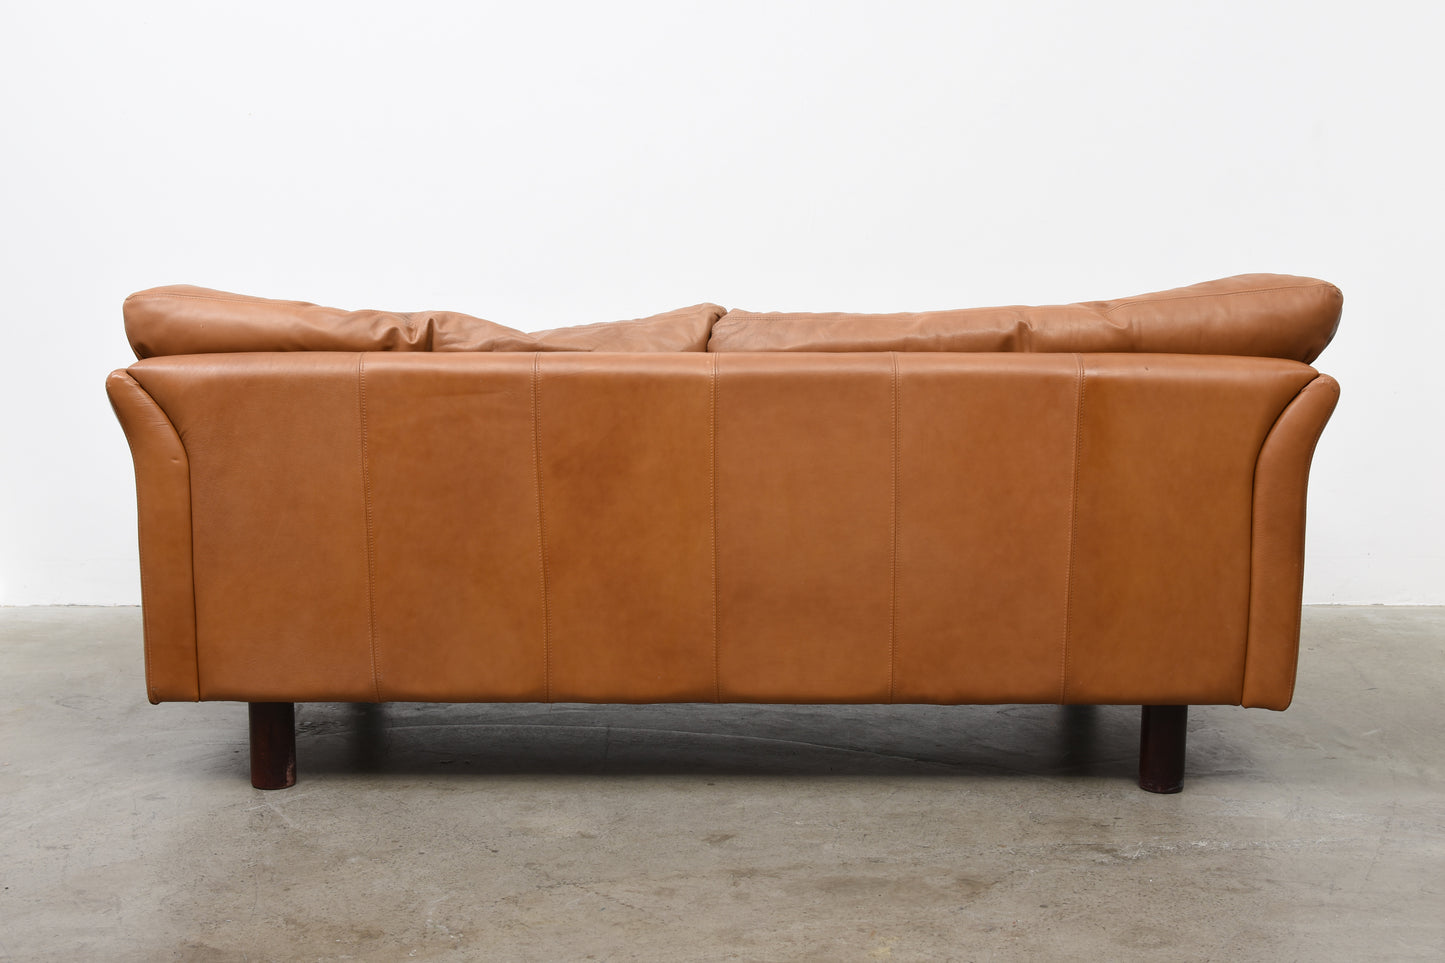 Tan leather sofa by Stouby